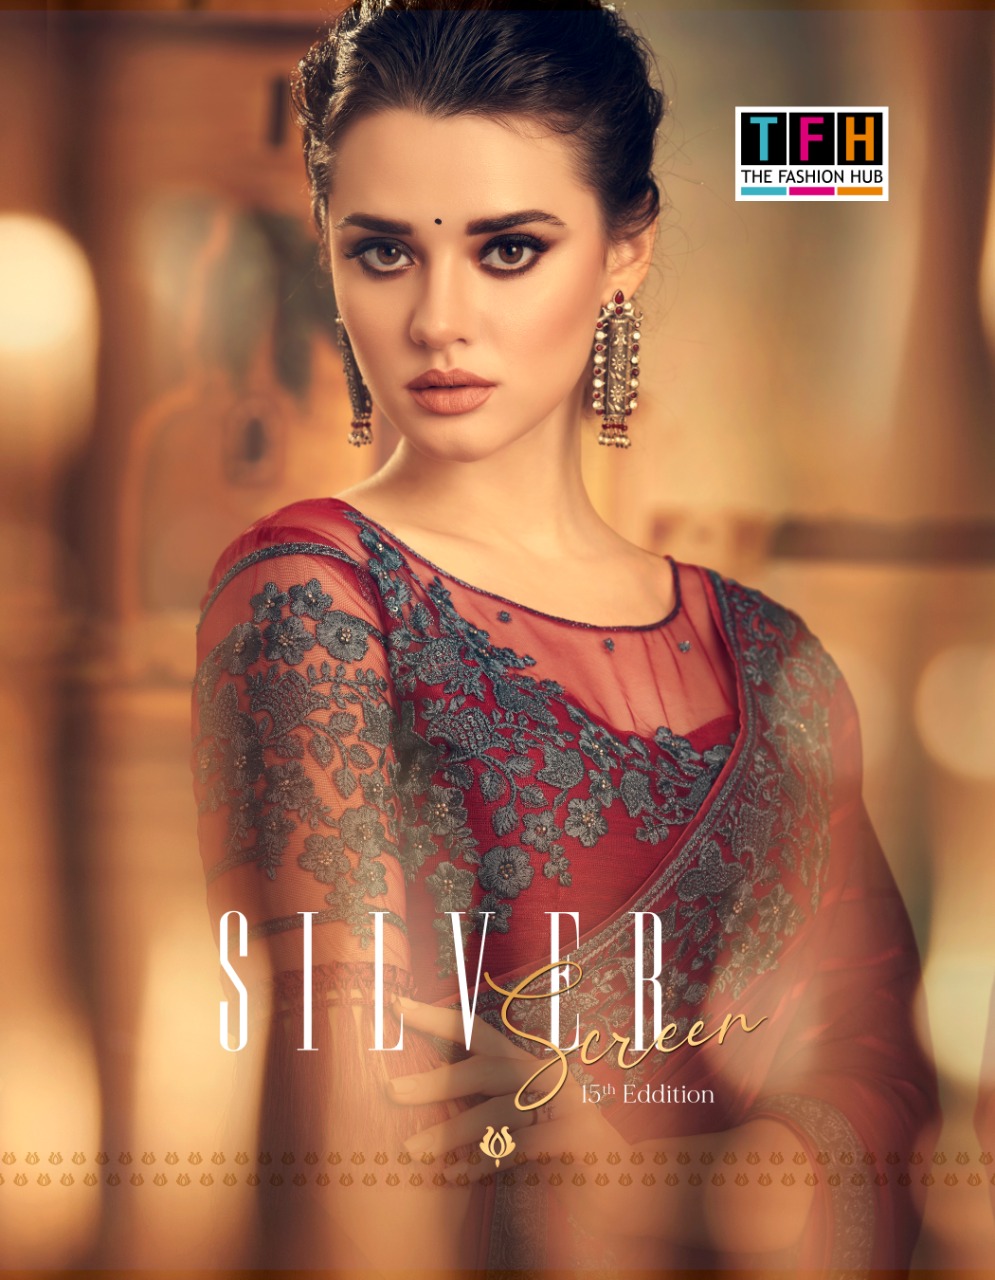 Tfh Presents Silver Screen 15th Eddition  Exclusive Blouse And Border Concept Partywear Sarees Catalogue Wholesaler And Exporters